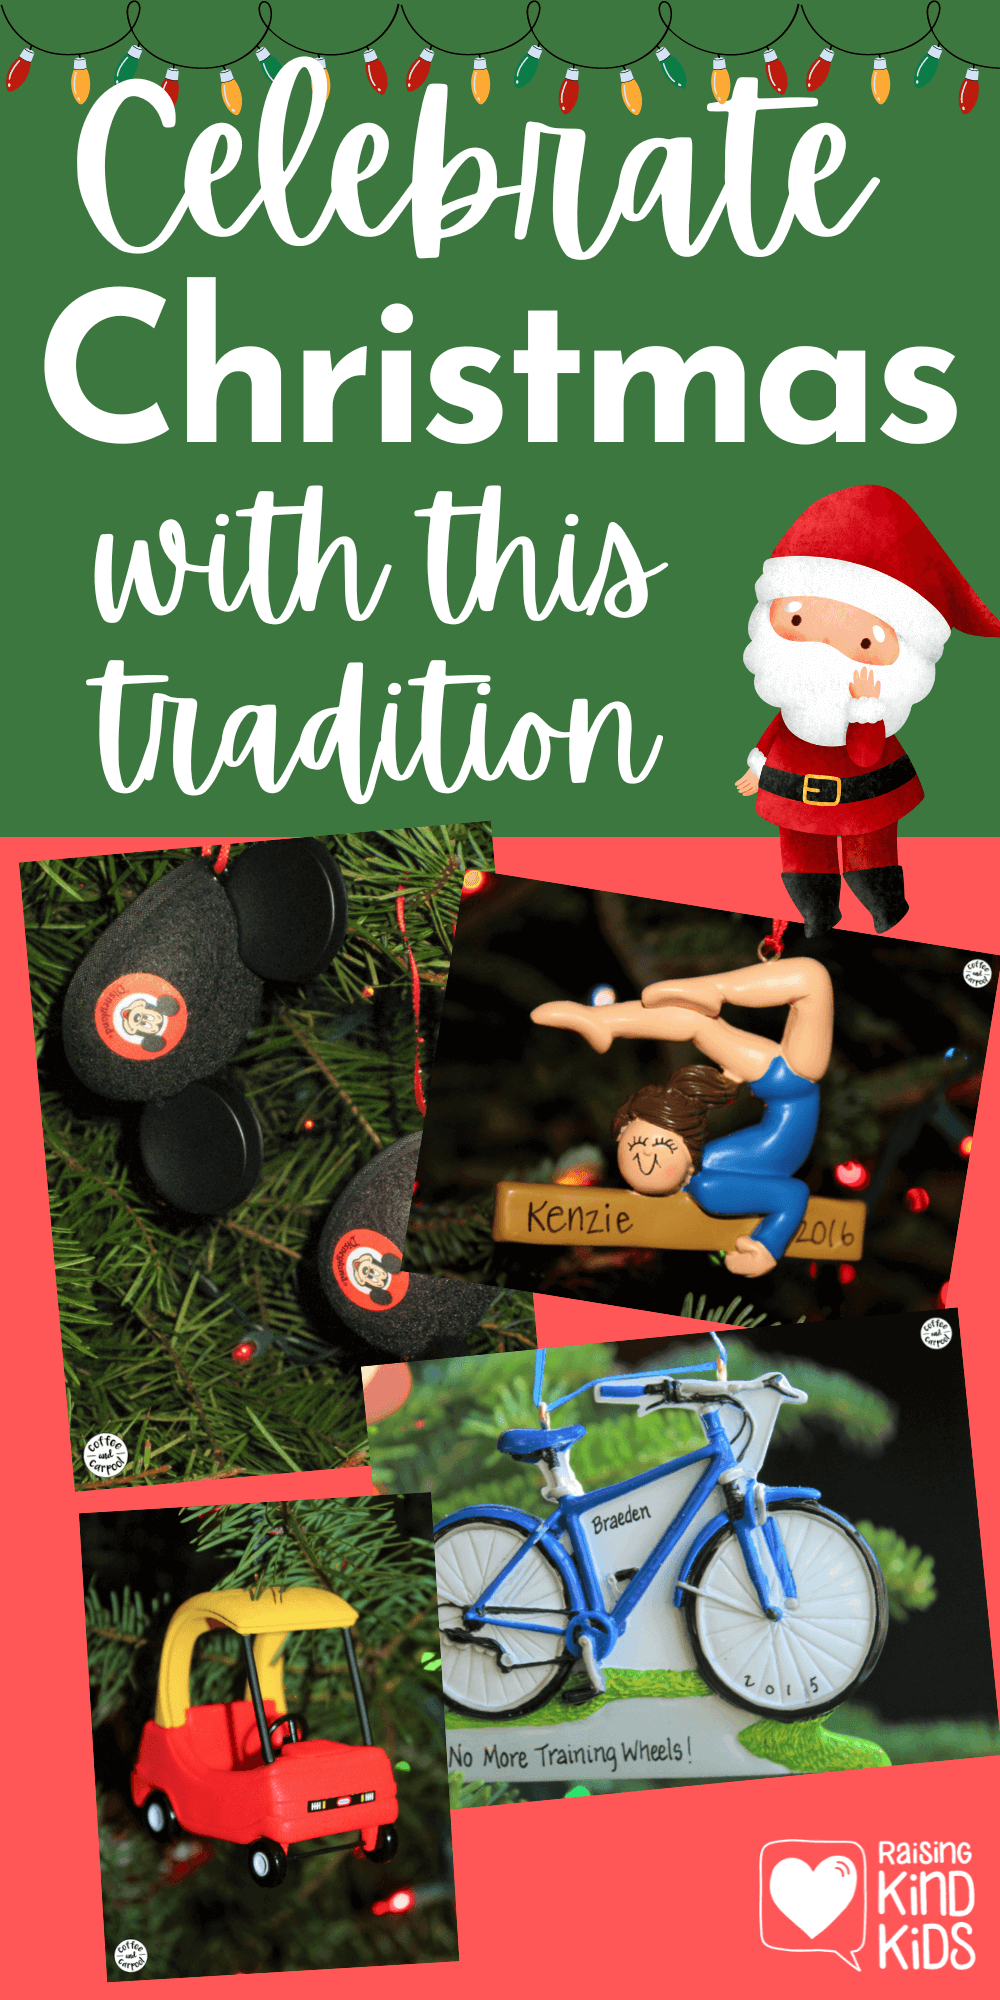 Christmas Ornaments Family Tradition to help celebrate memories at the end of each year #decembertraditions #familytraditions #Christmastraditions #Christmasforfamilies #Christmasornaments #familytraditions #coffeeandcarpool #familyidentity #familymemories